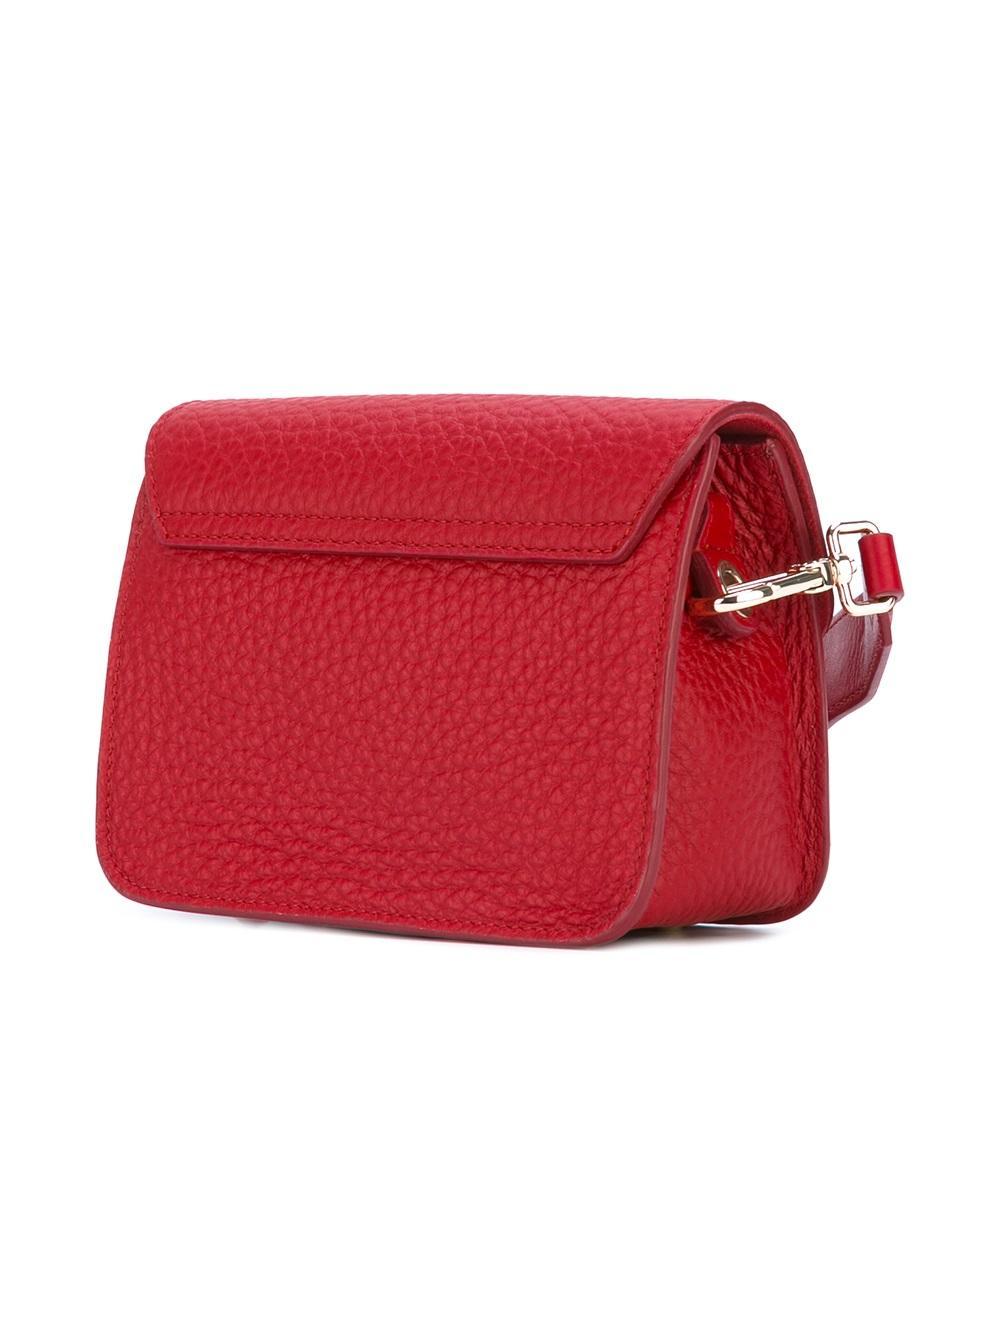 Furla Leather Thick Strap Crossbody Bag in Red - Lyst